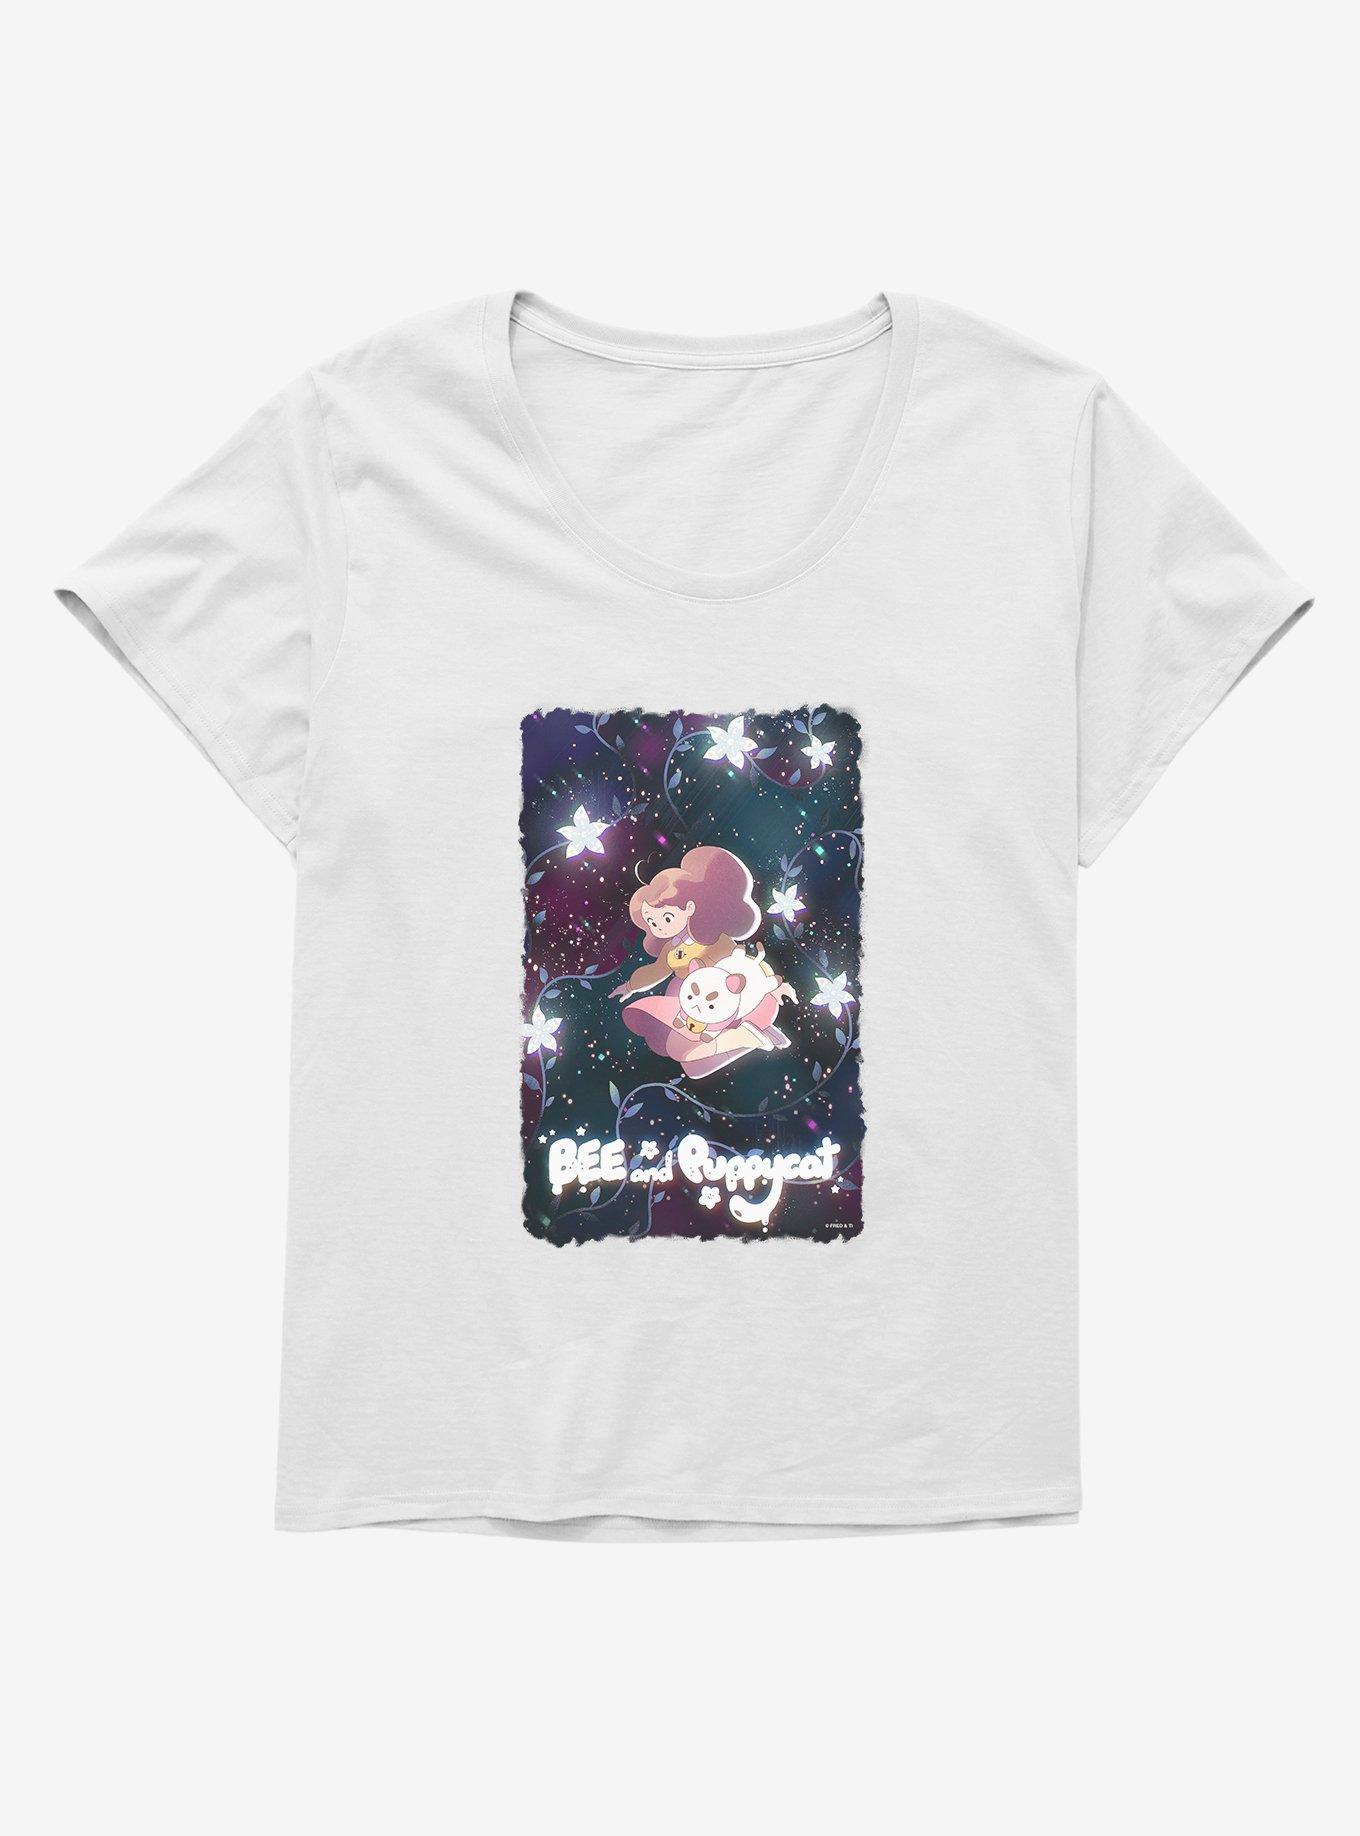 Bee And Puppycat Space Flowers Poster Girls T-Shirt Plus Size, WHITE, hi-res